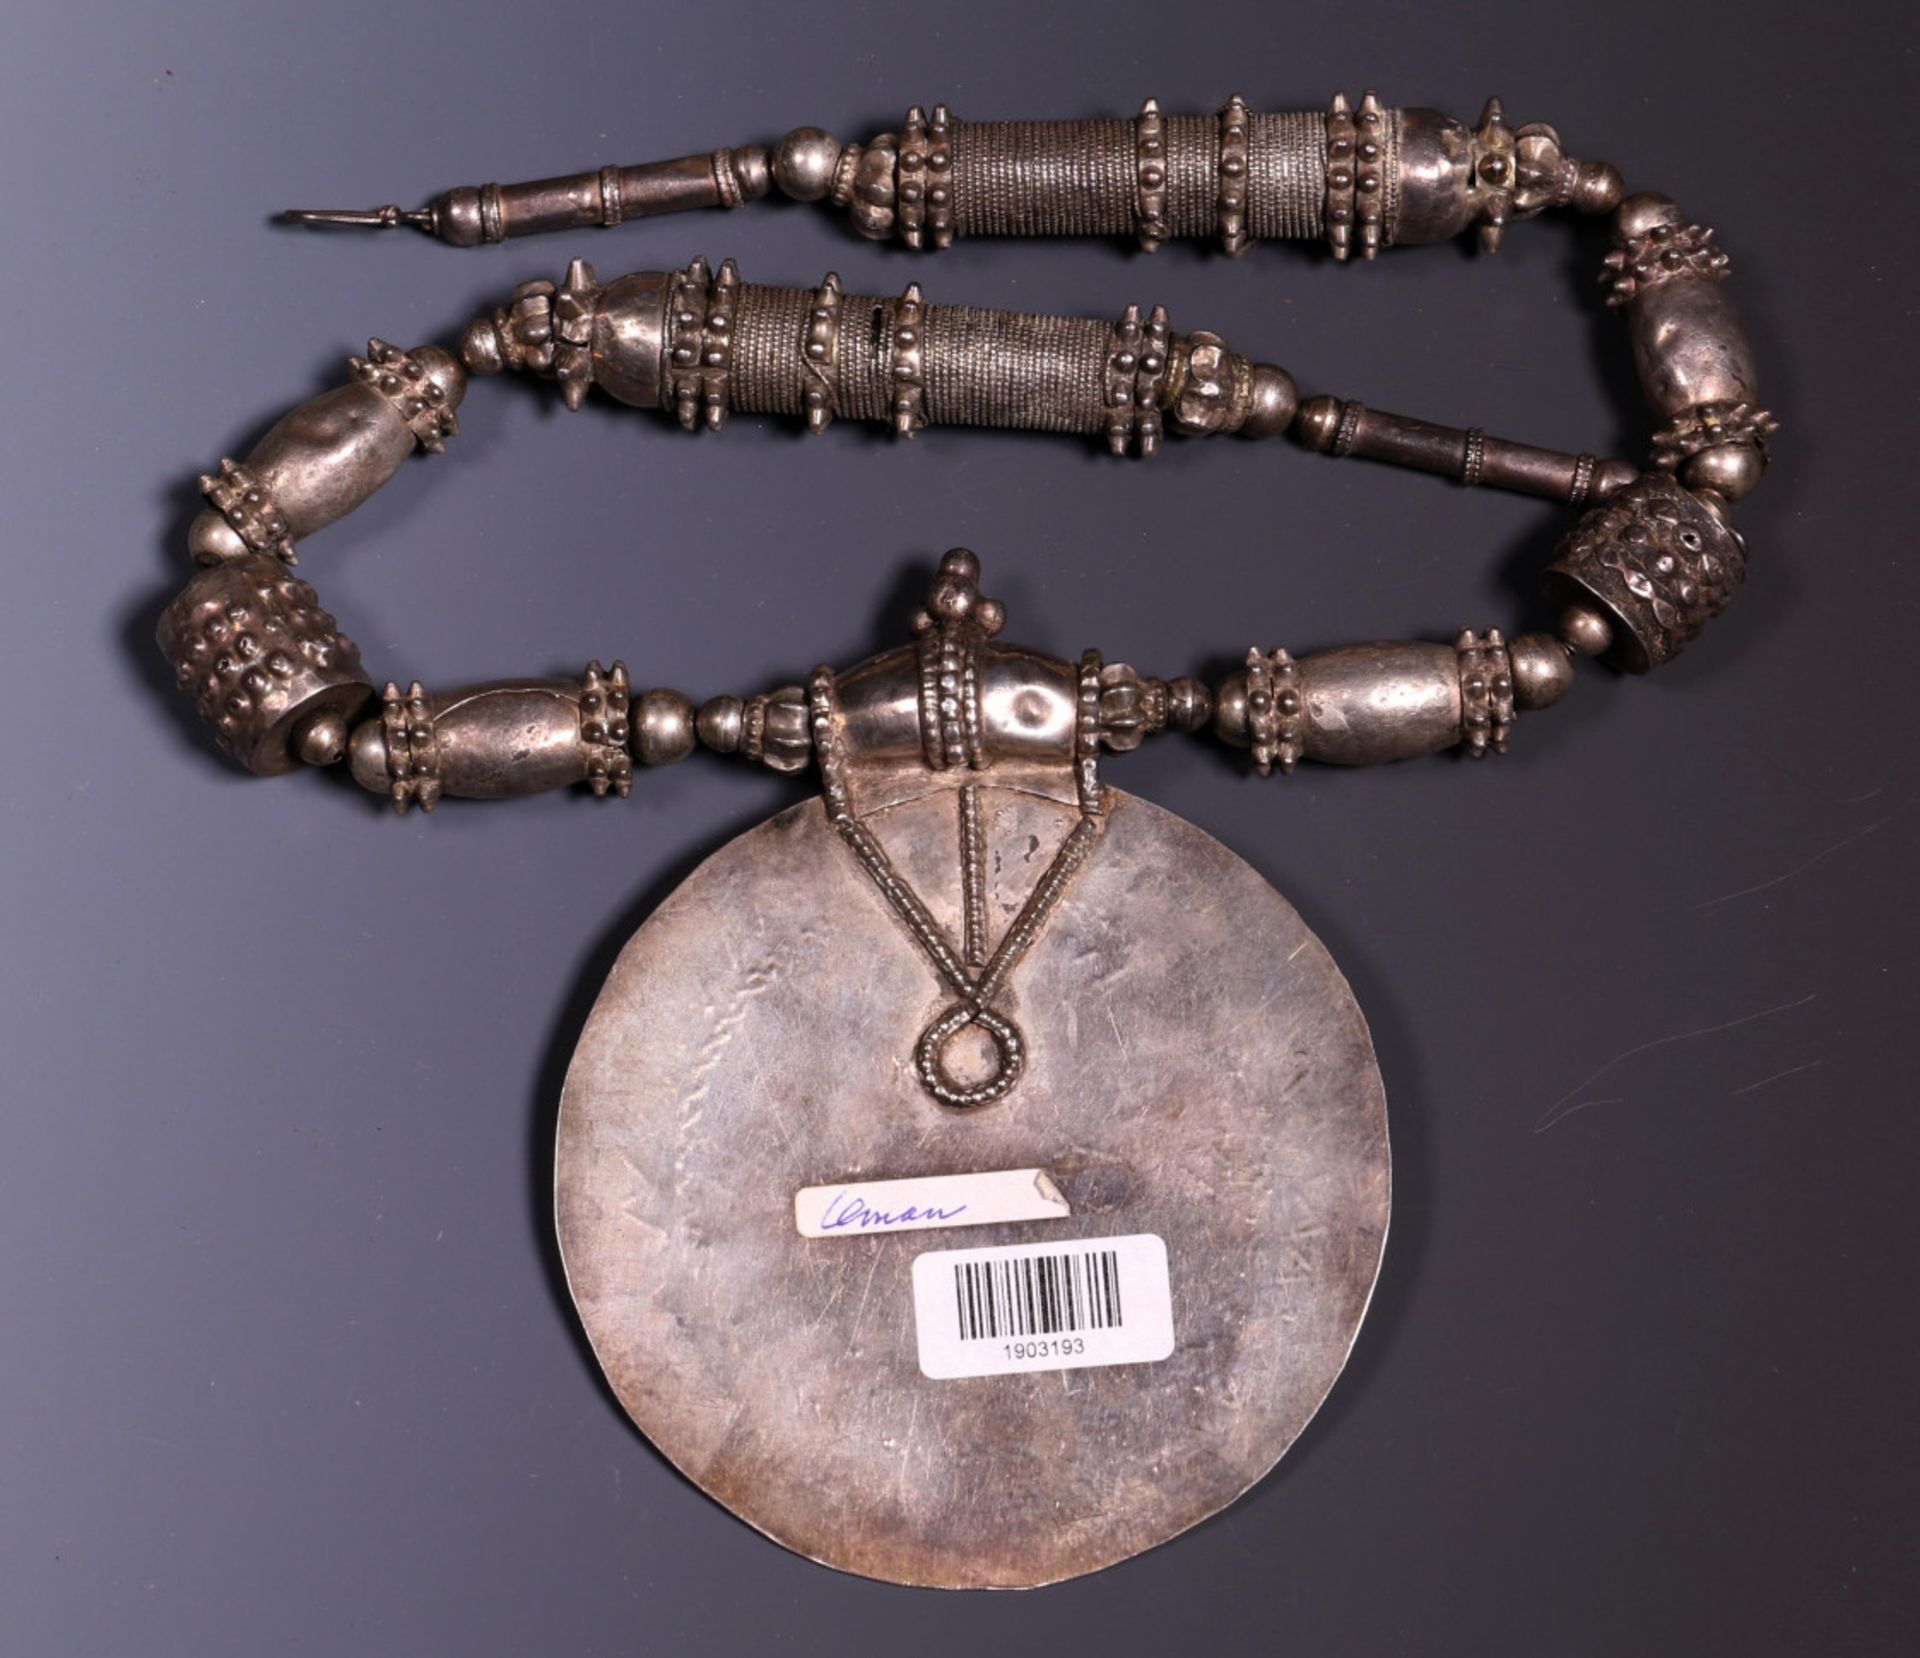 Jemen, silver alloy necklace with big beads and disk-shaped pendant - Bild 2 aus 4